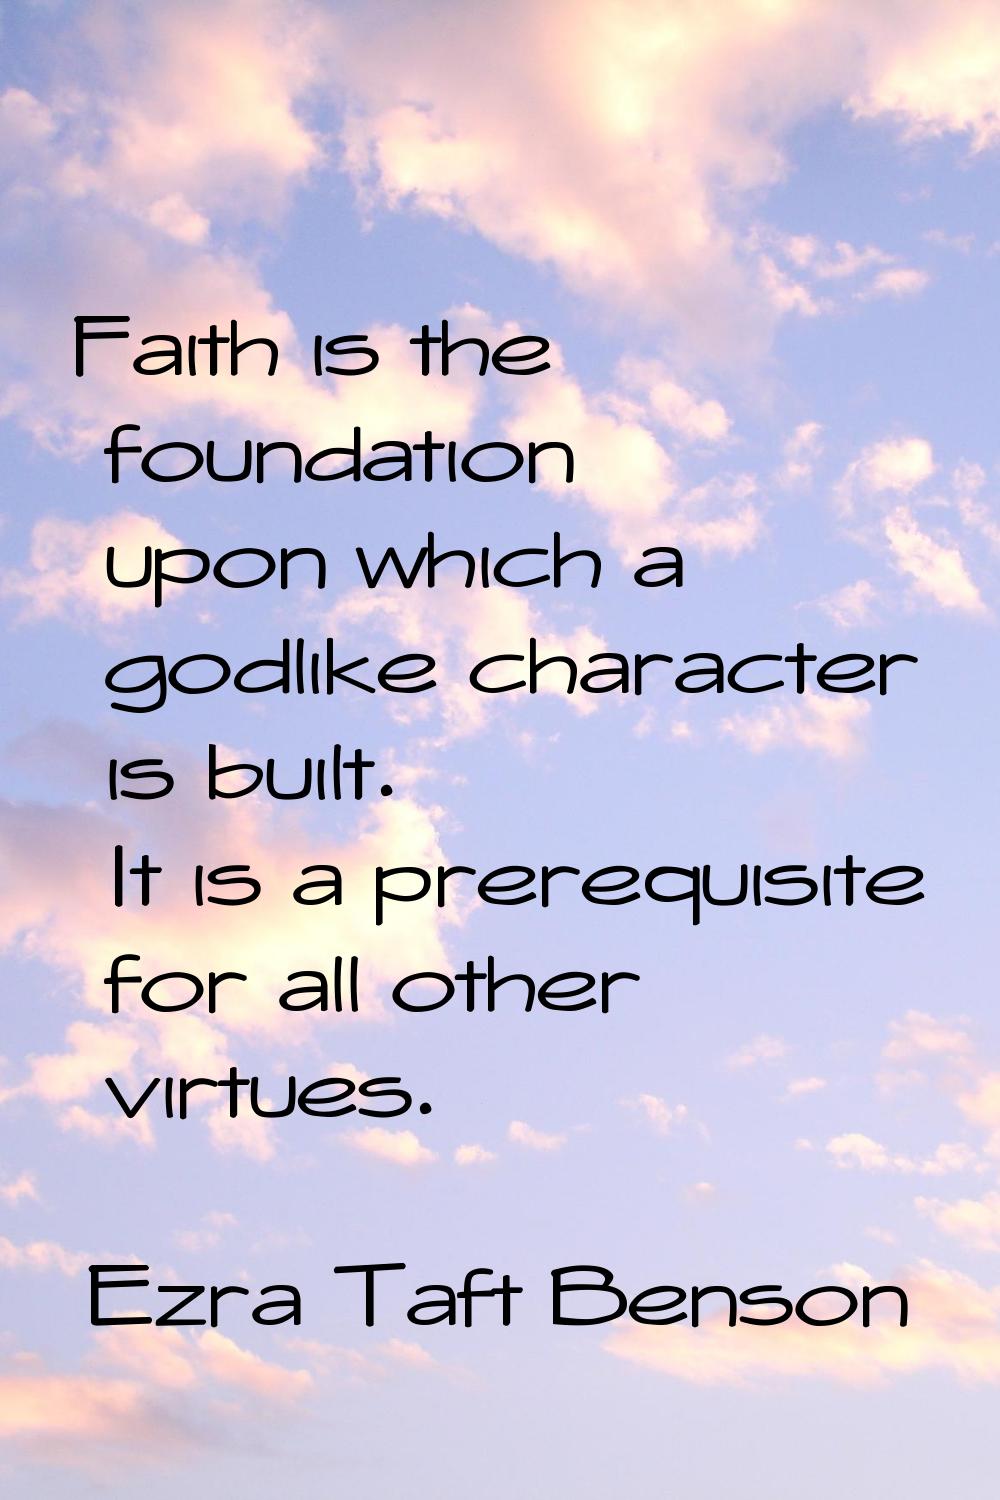 Faith is the foundation upon which a godlike character is built. It is a prerequisite for all other